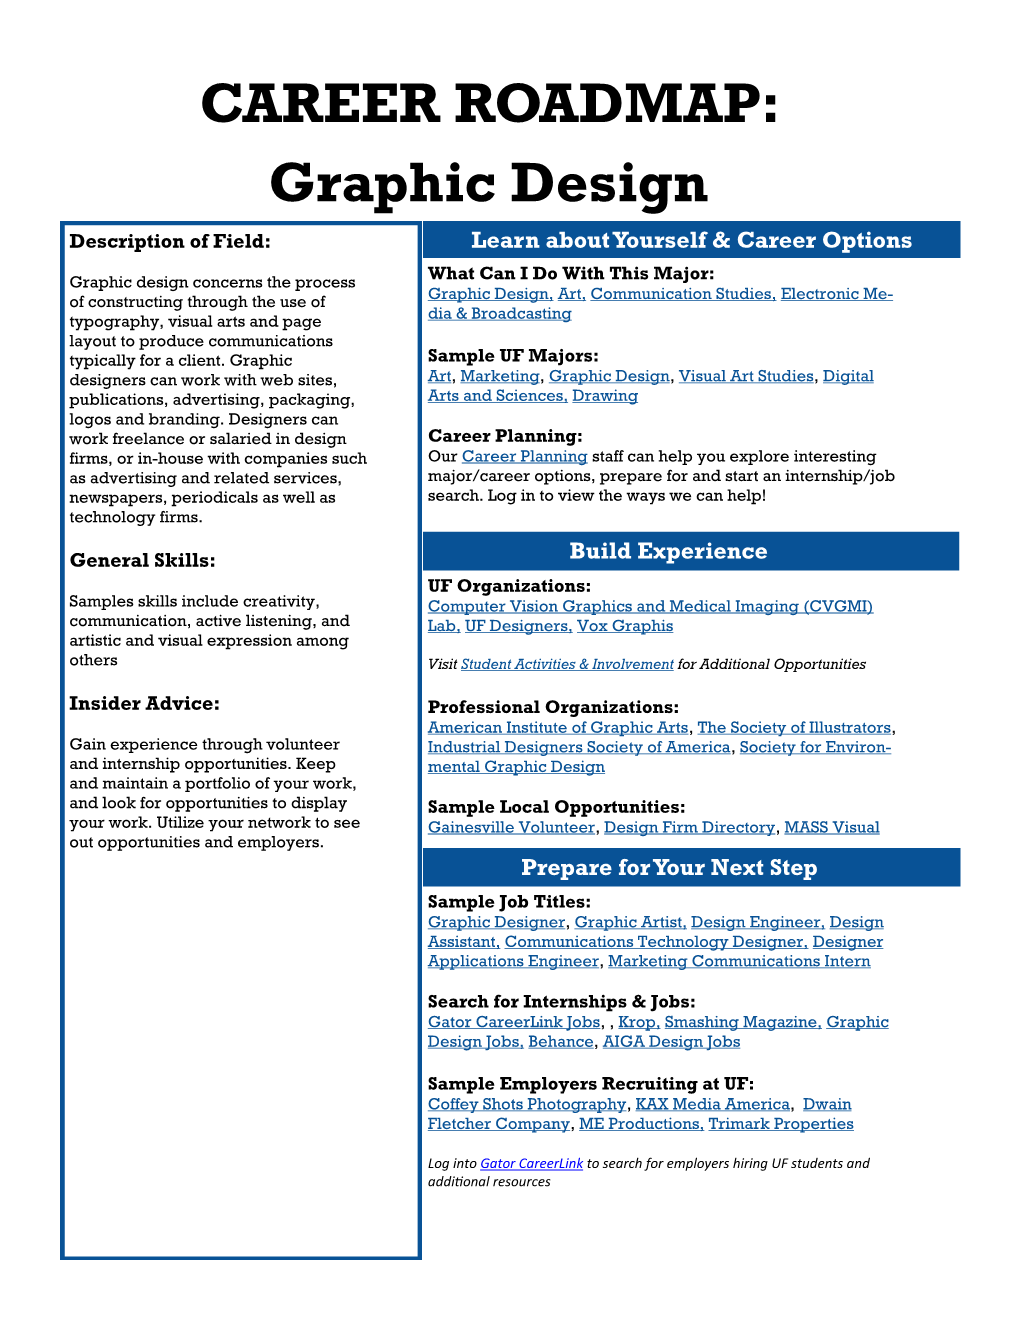 CAREER ROADMAP: Graphic Design Description of Field: Learn About Yourself & Career Options